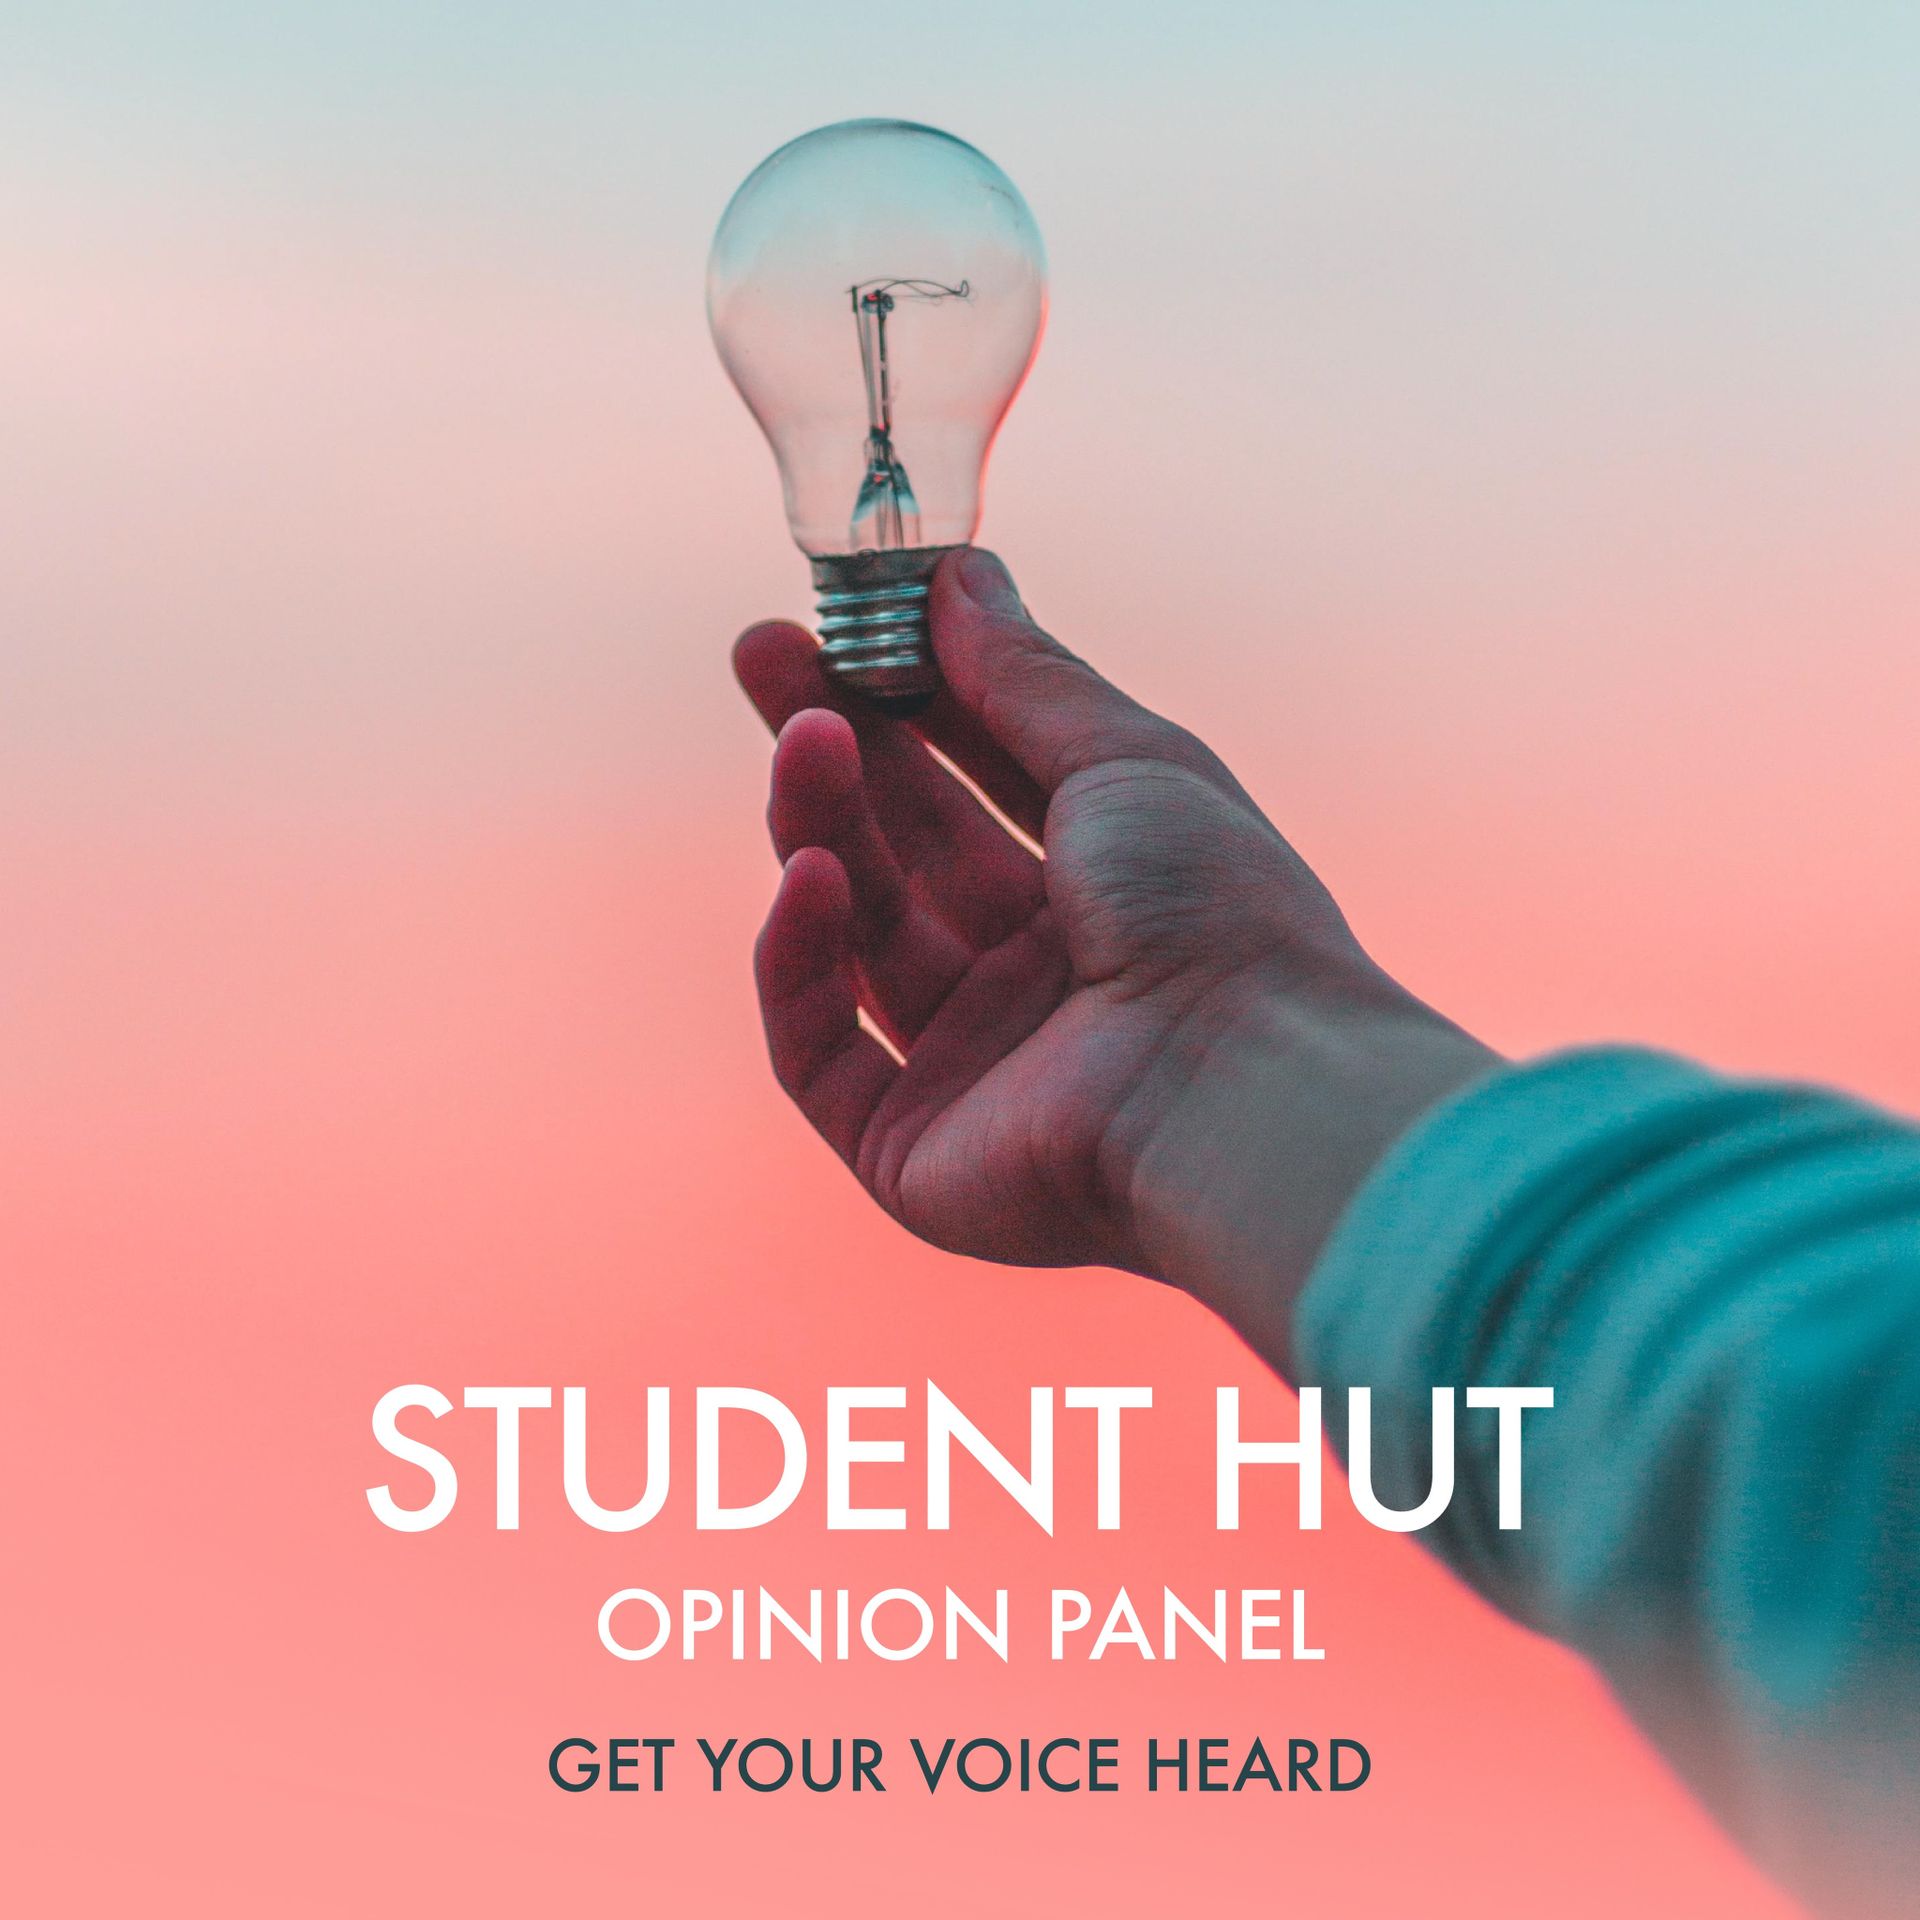 Student Hut Opinion Panel - Get your voice heard